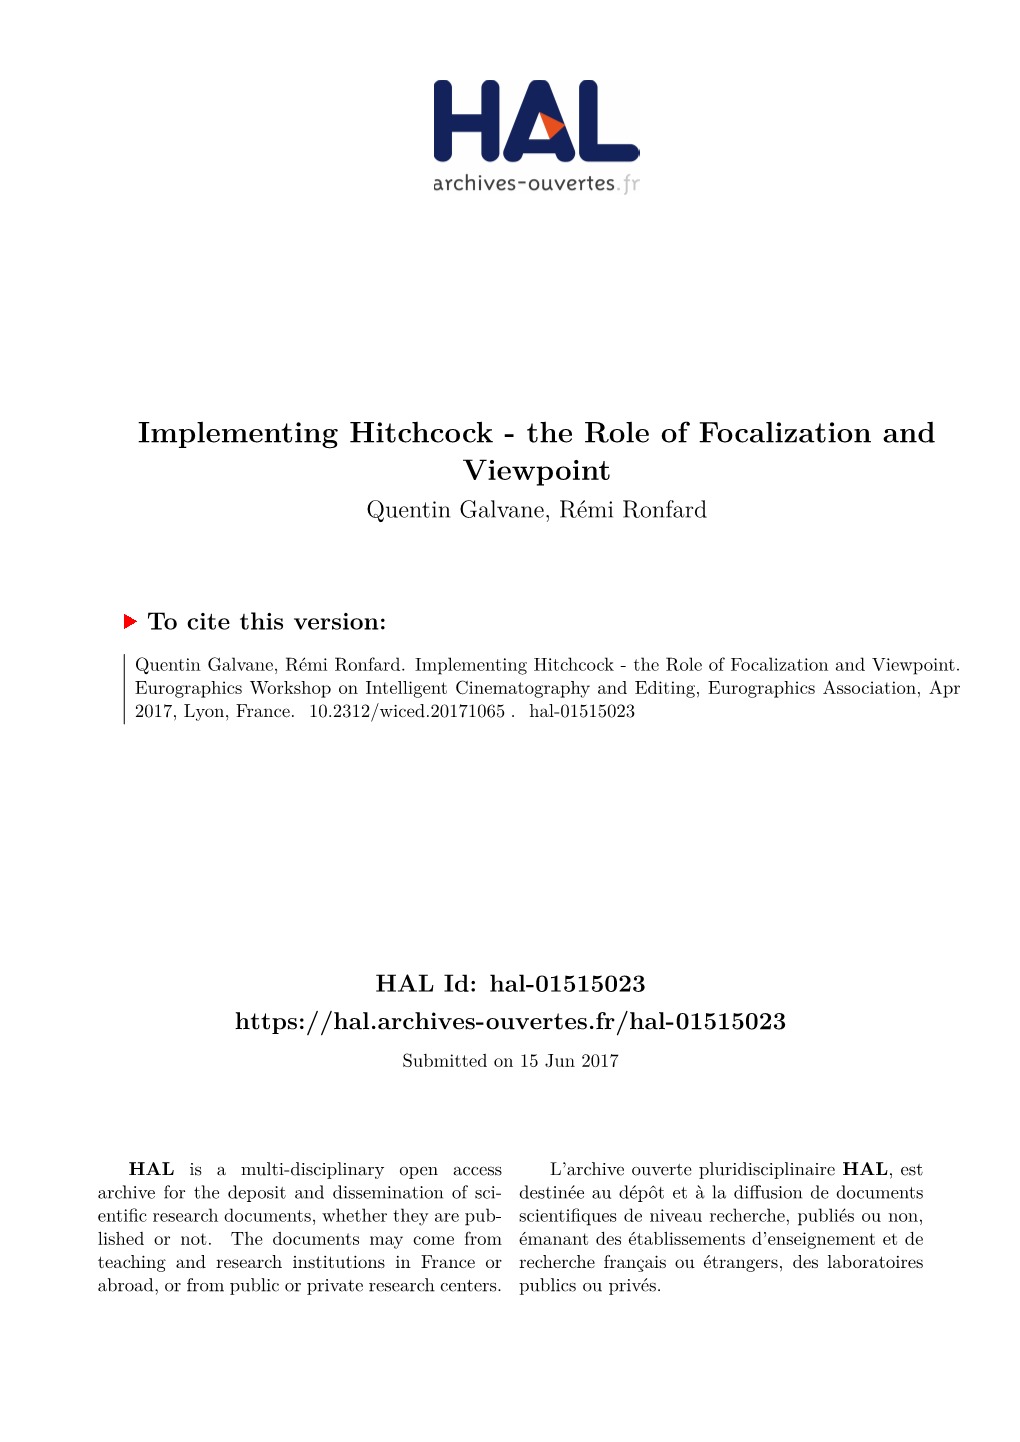 Implementing Hitchcock - the Role of Focalization and Viewpoint Quentin Galvane, Rémi Ronfard